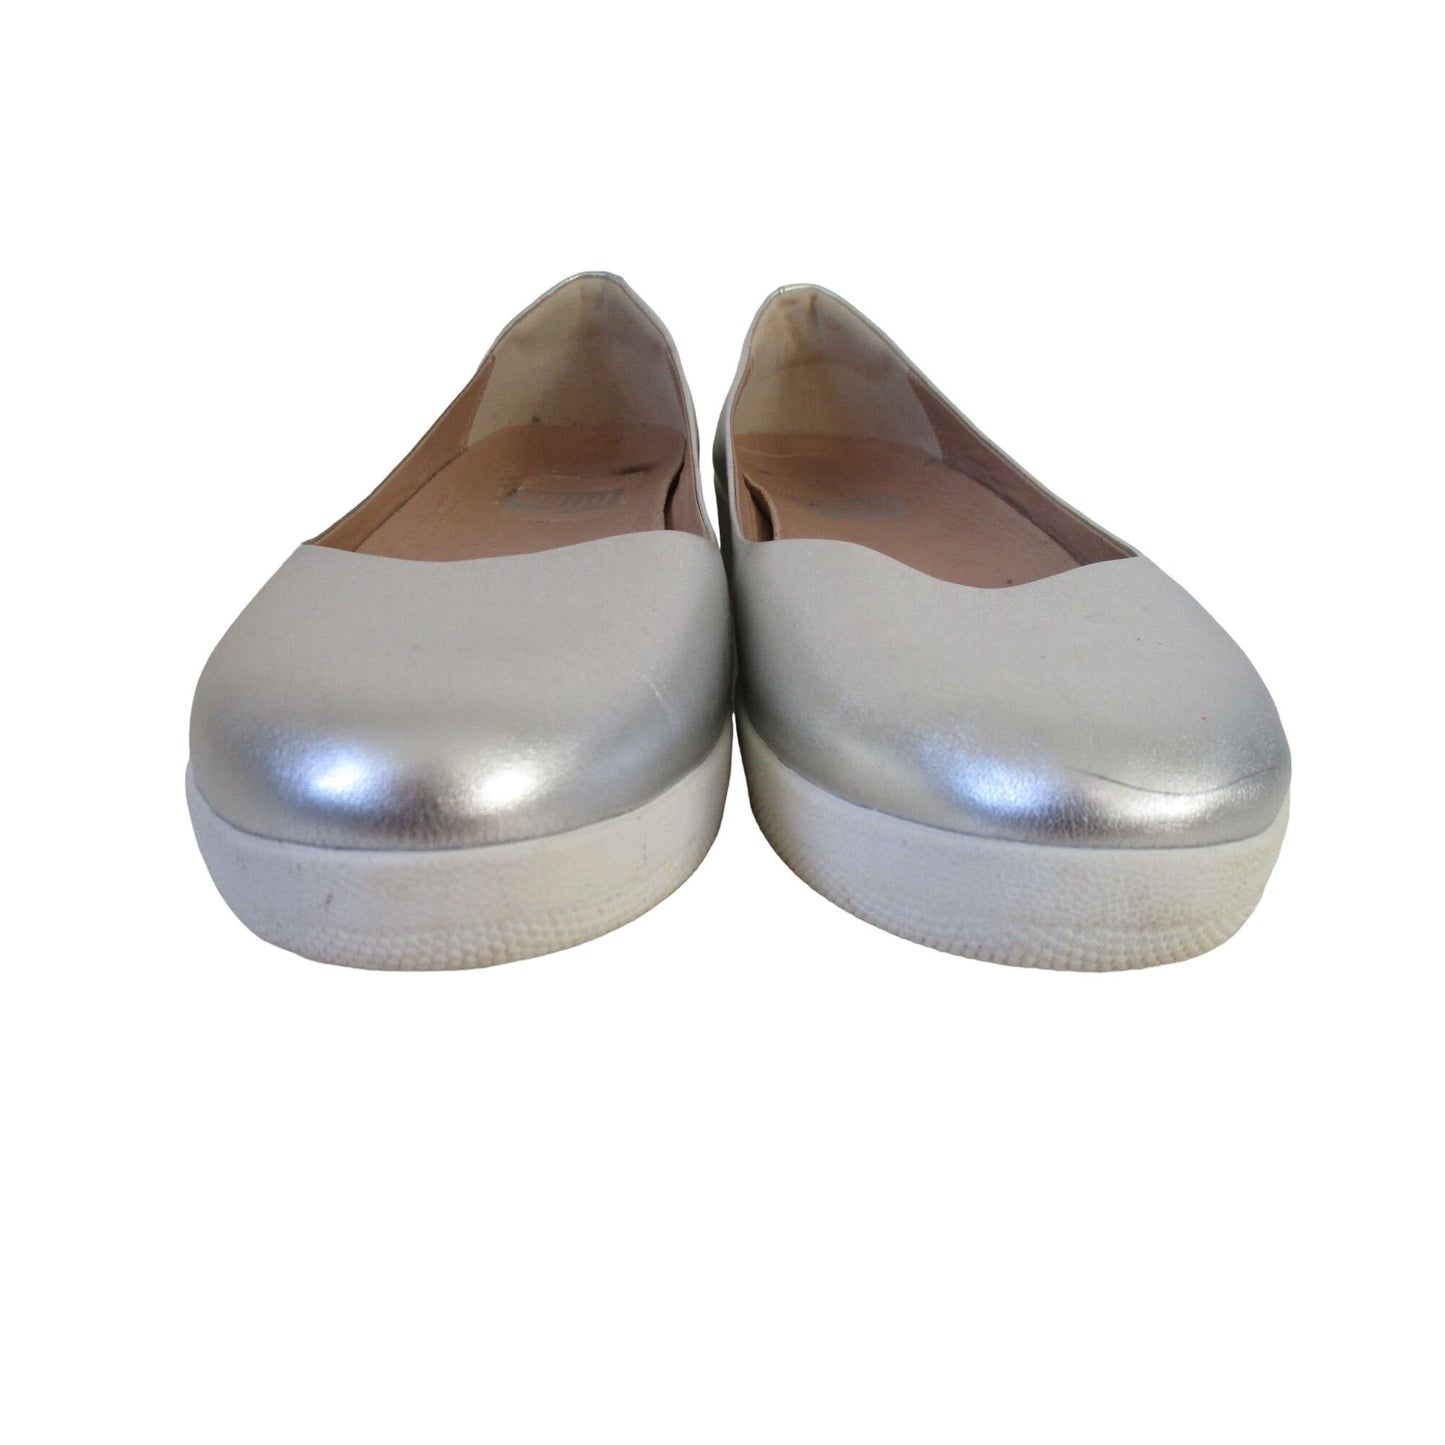 FitFlop silver leather, size 7, flats with white rubber soles